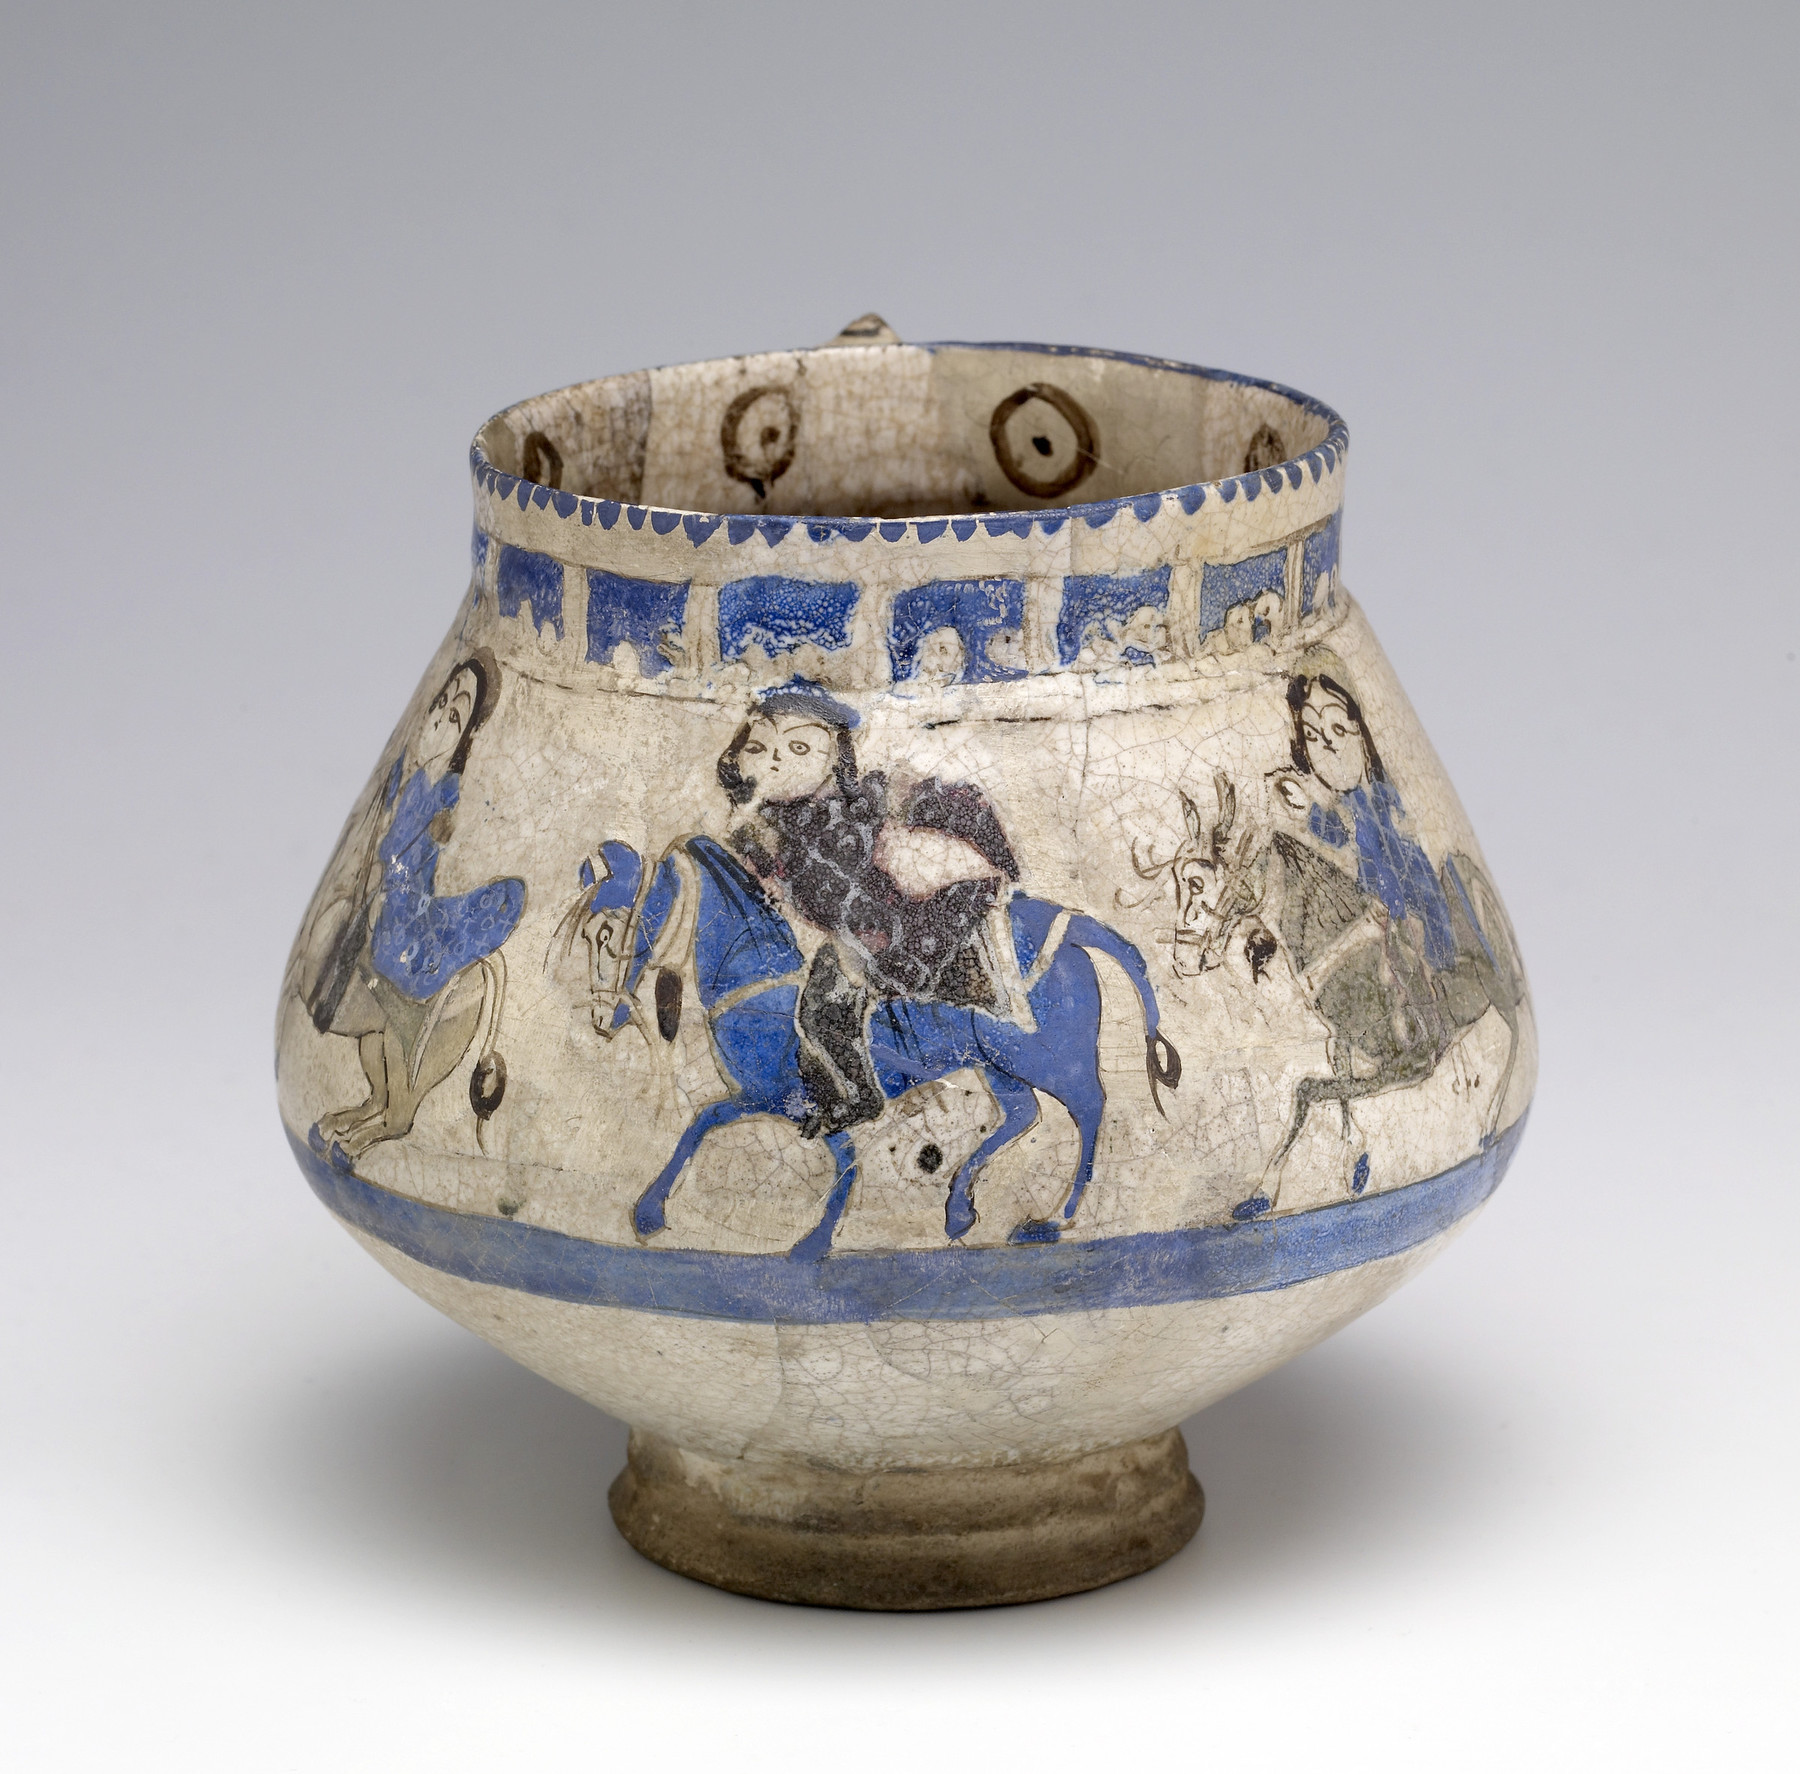 Image for Jug with Horsemen and Inscriptions